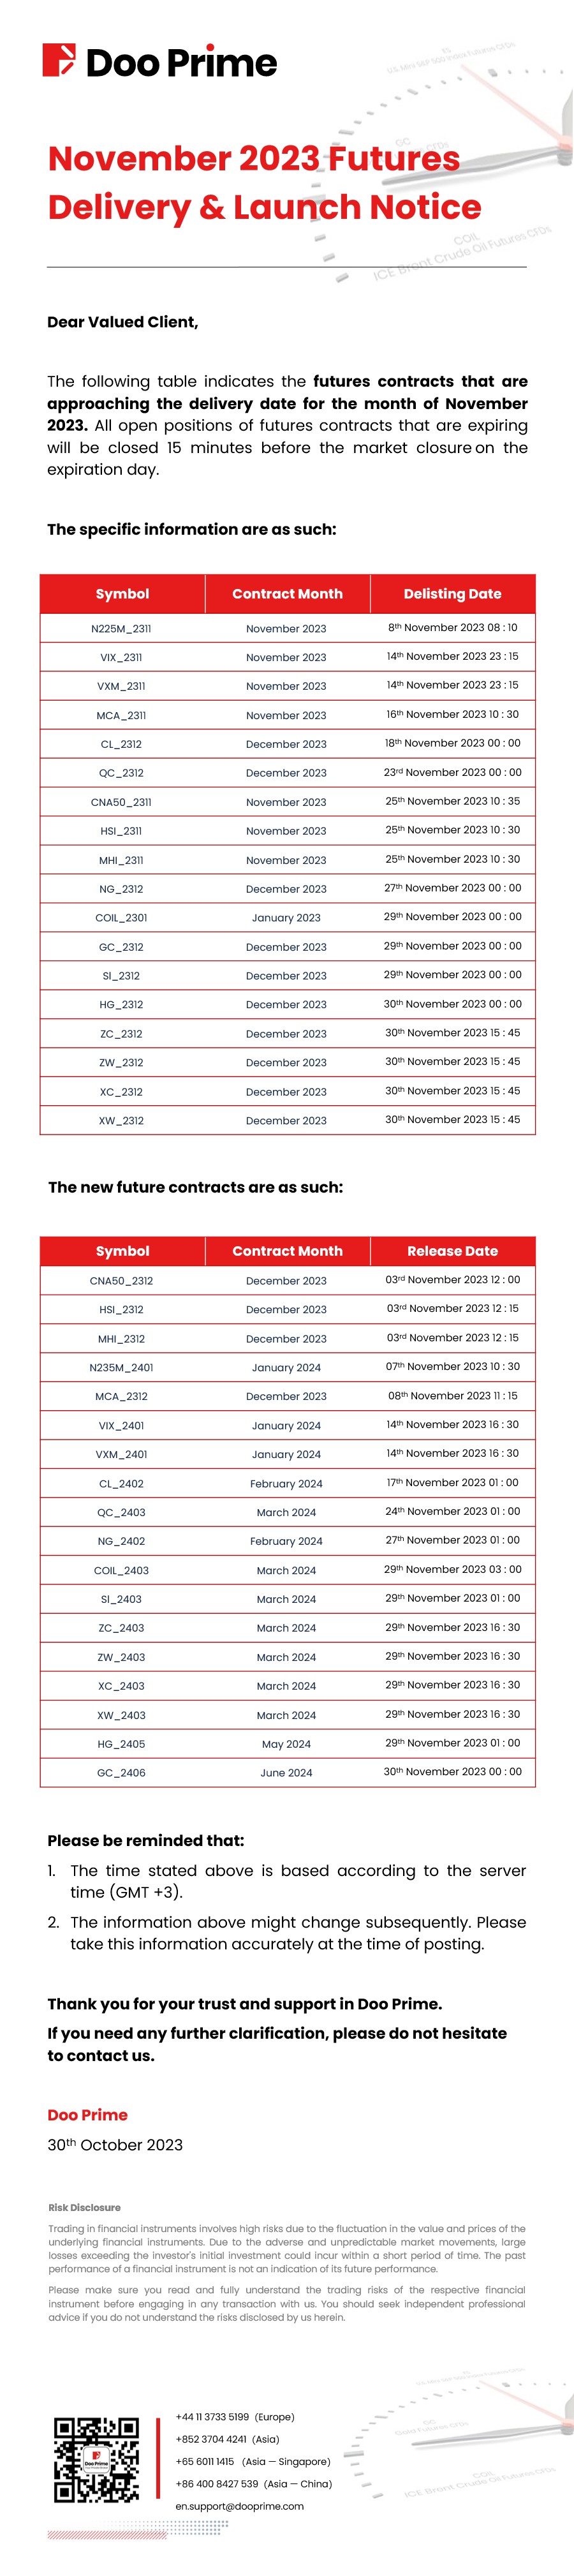 Doo Prime November 2023 Futures Delivery & Launch Notice